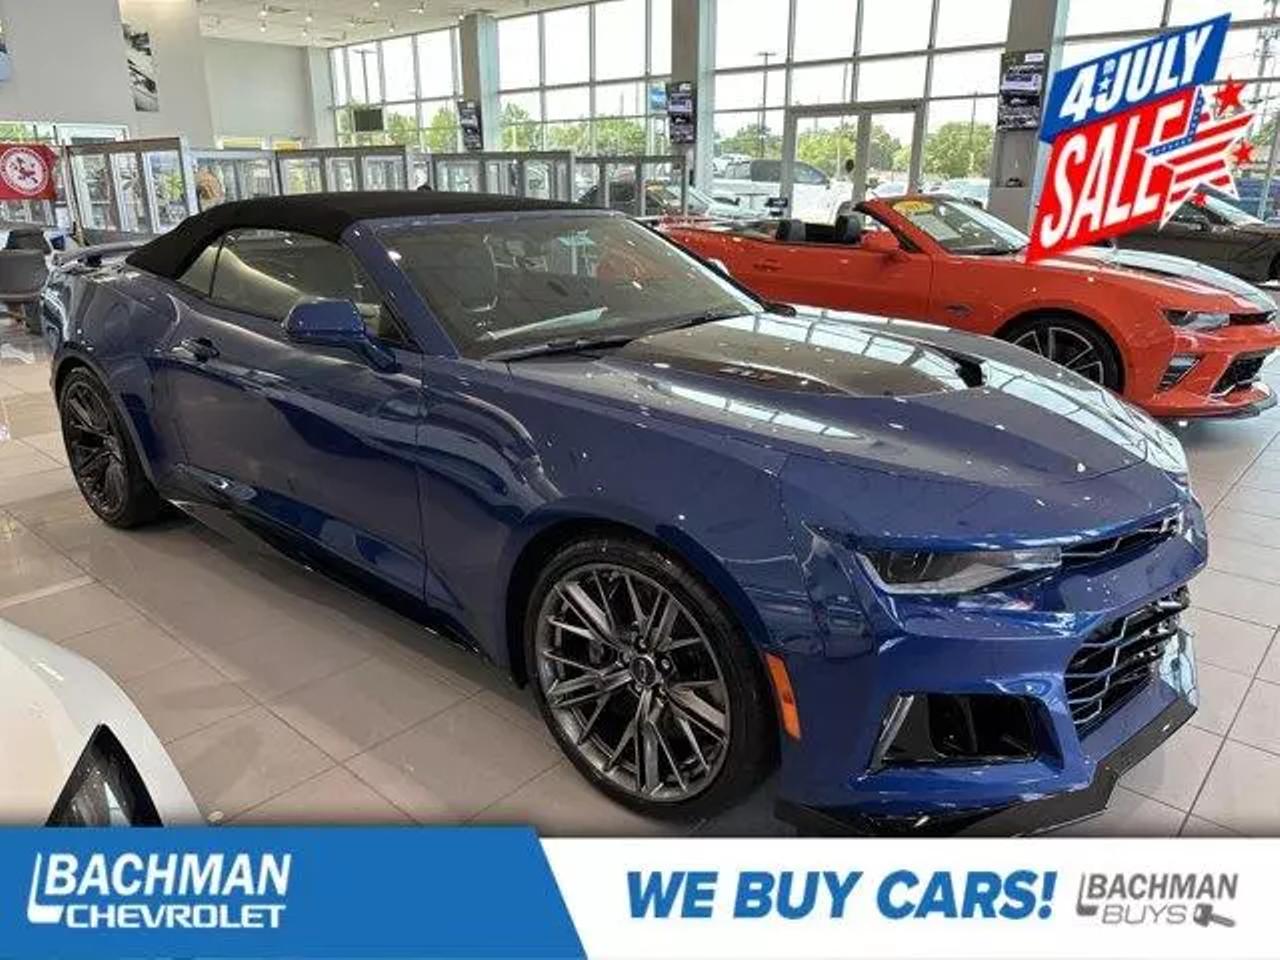 Used 6th Generation Facelift Chevrolet Camaro ZL1 Convertible For Sale